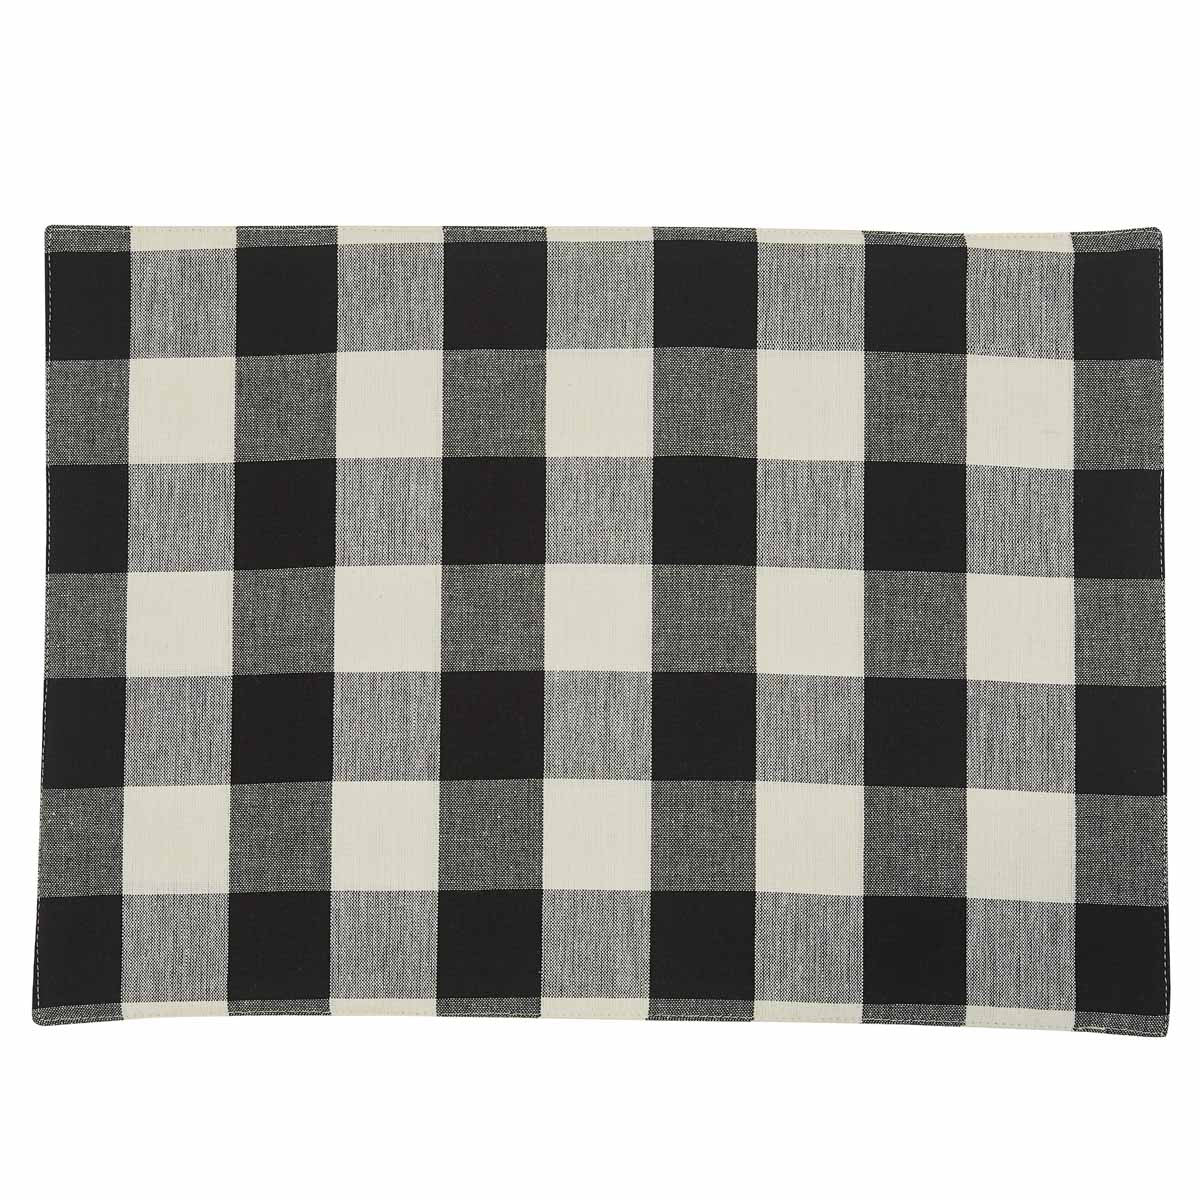 Wicklow Check Placemats - Black & Cream Backed Set of 6 Park Designs